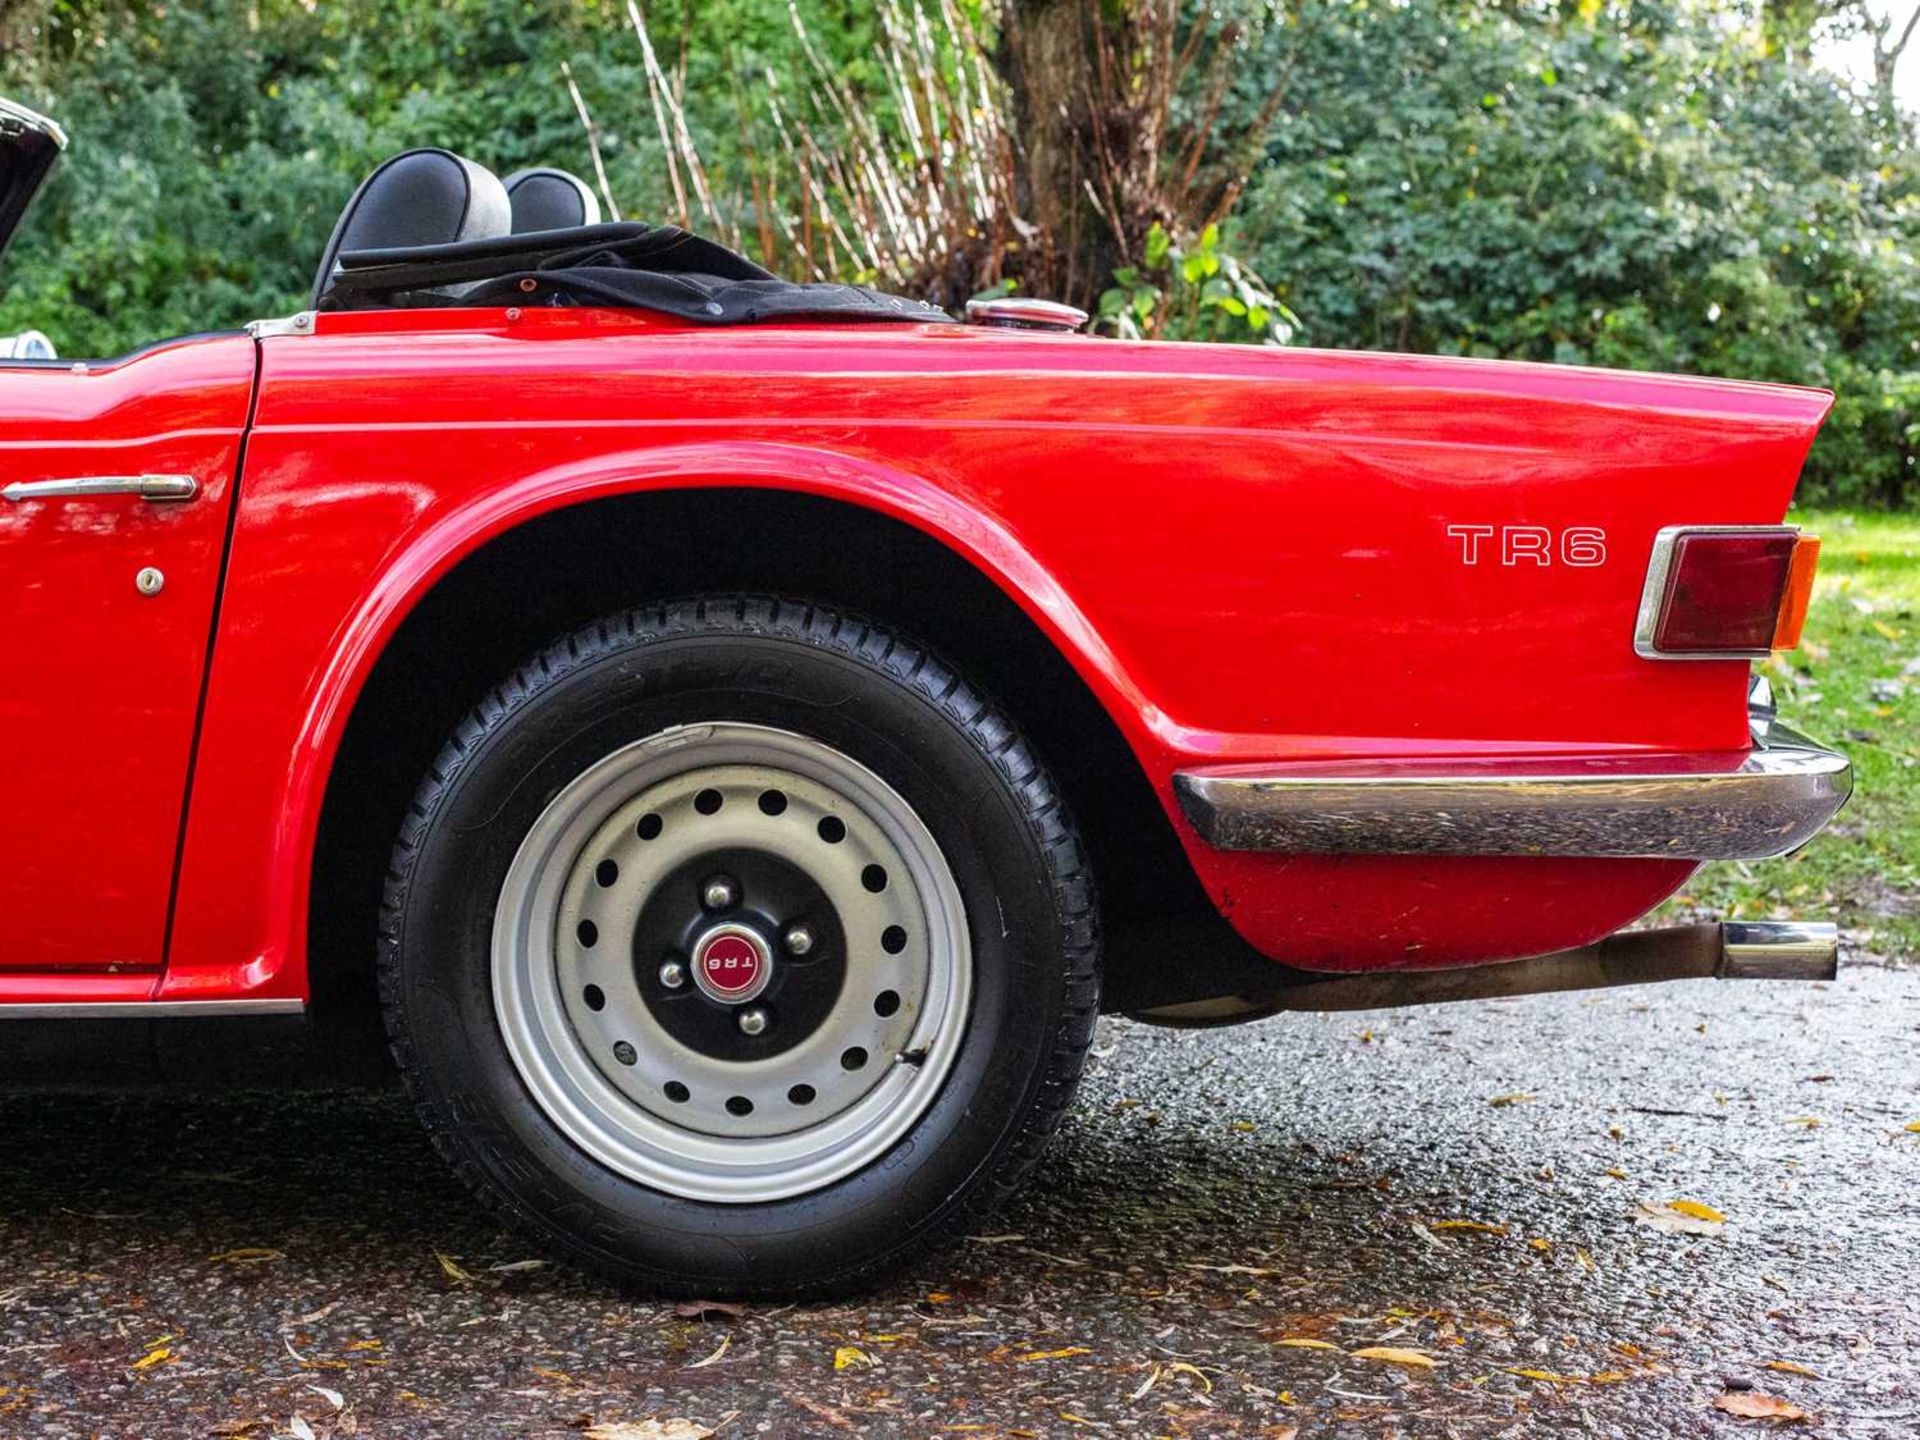 1969 Triumph TR6 Repatriated in 2020, converted to RHD and equipped with UK-specification SU carbure - Image 12 of 53